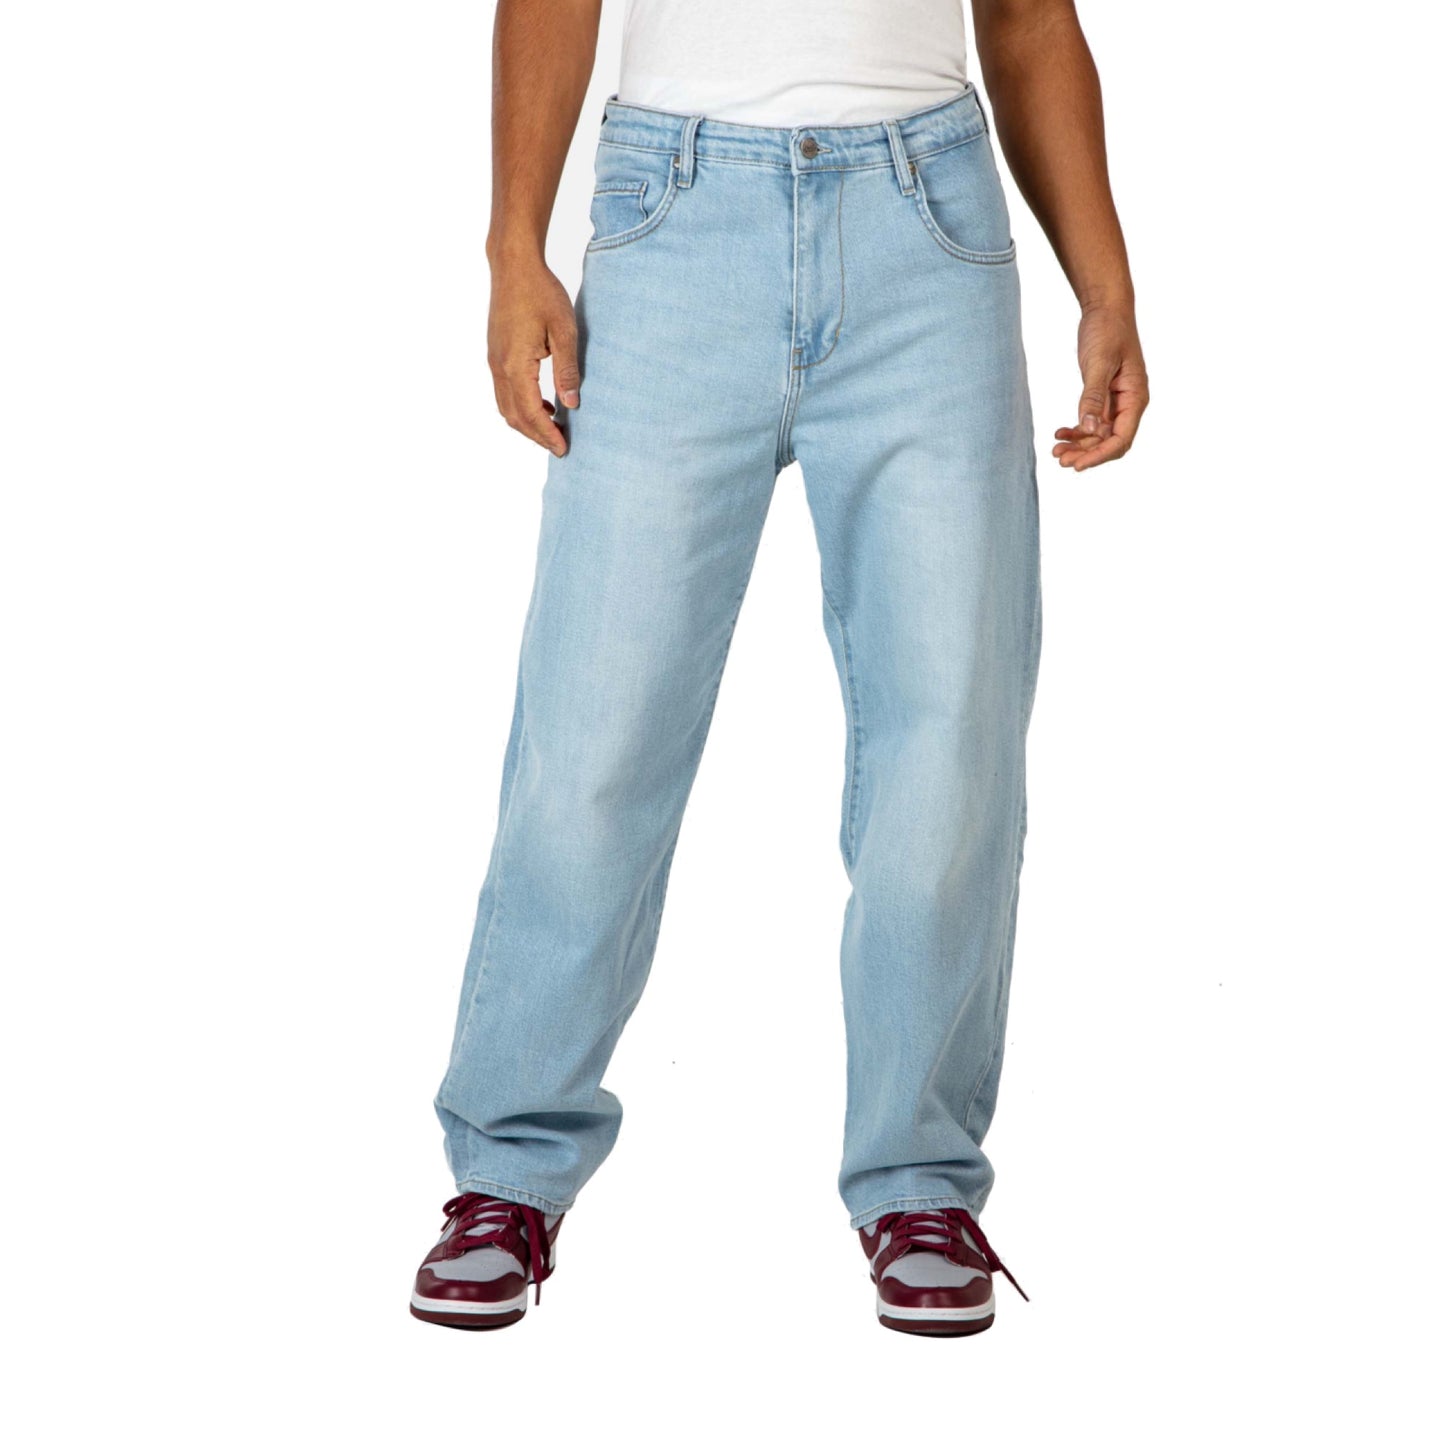 Reell Solid Jeans Tapered Fit Light Blue Stone